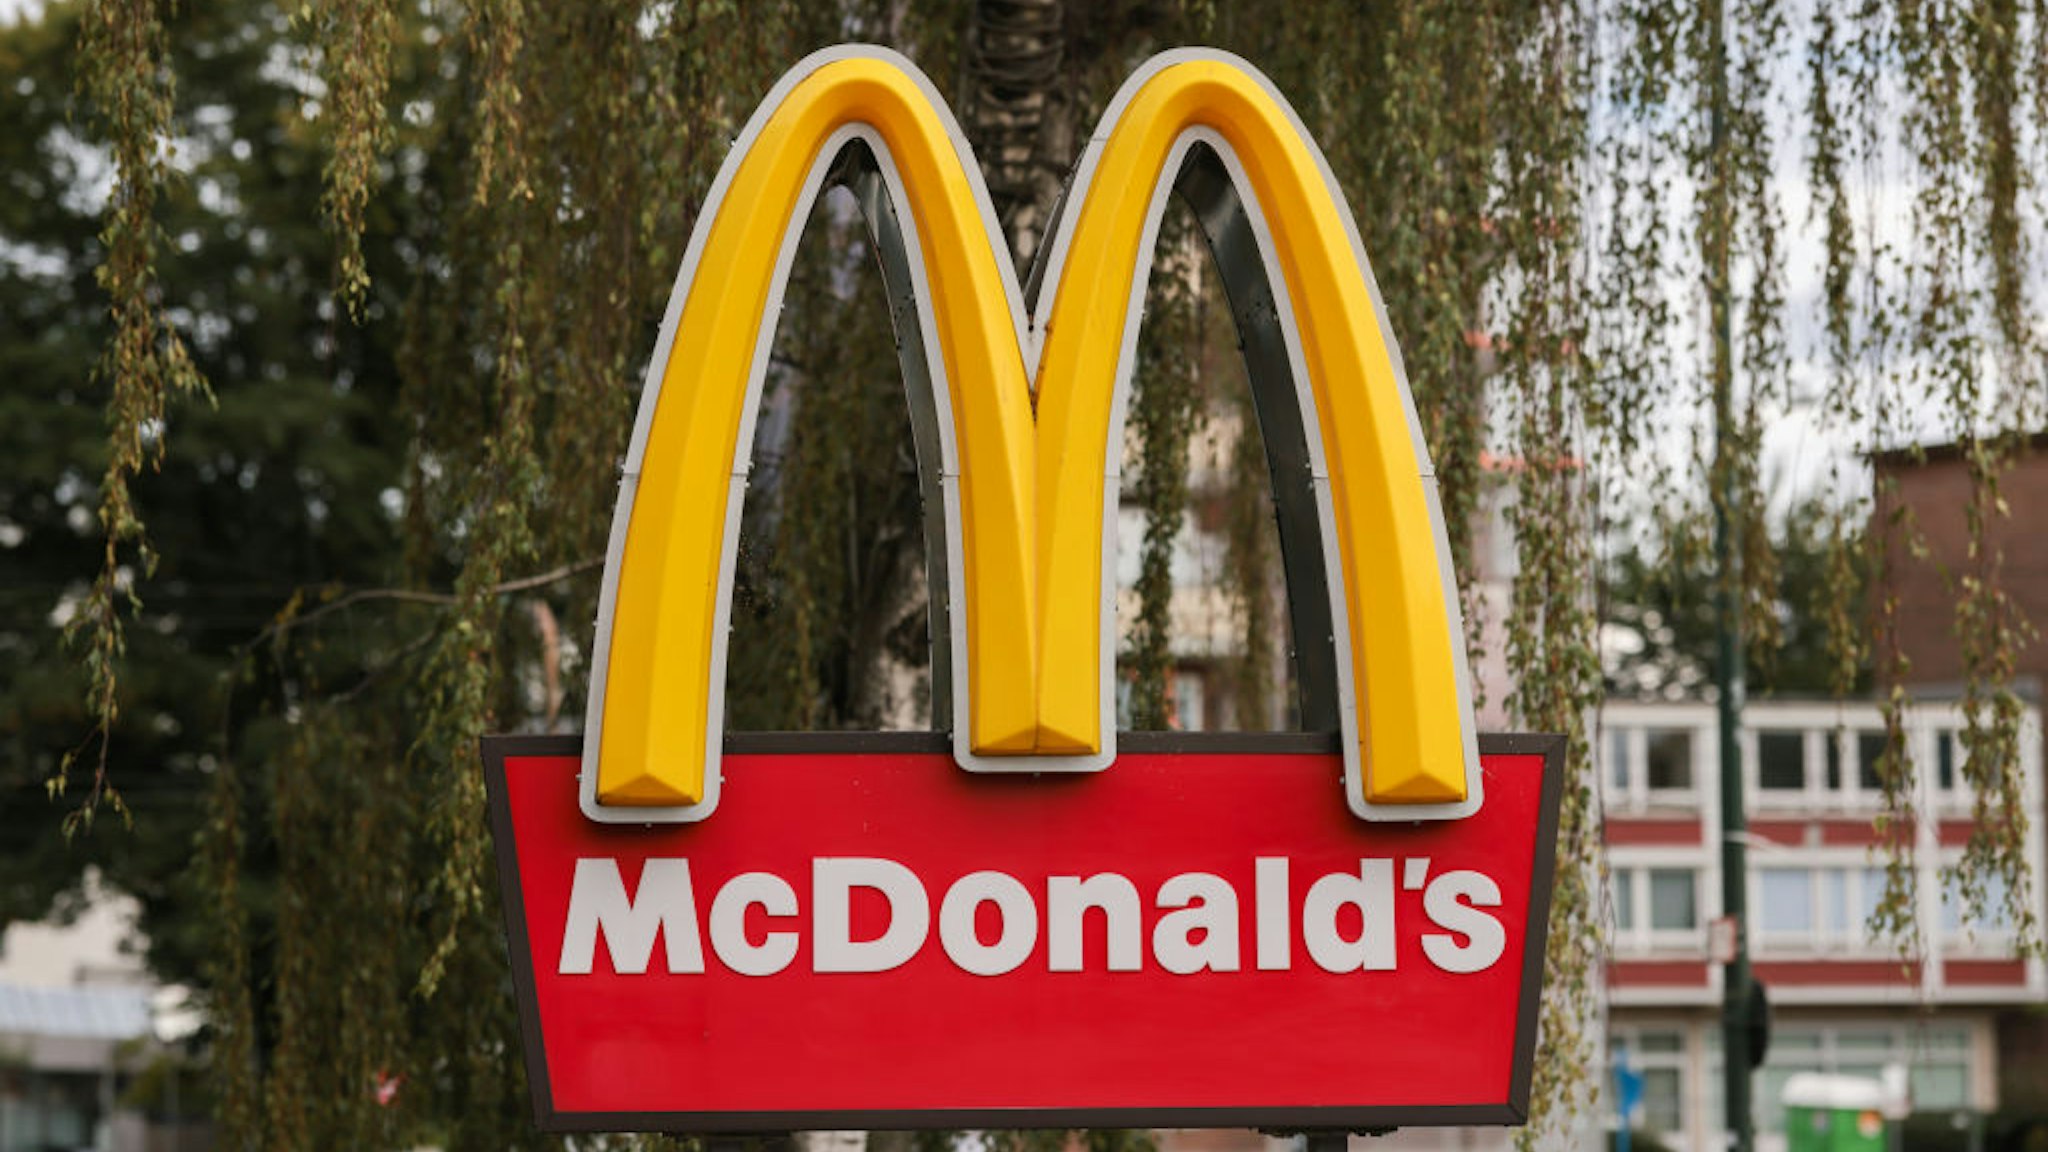 McDonalds logo photographed on August 07, 2021 in Dusseldorf, Germany.